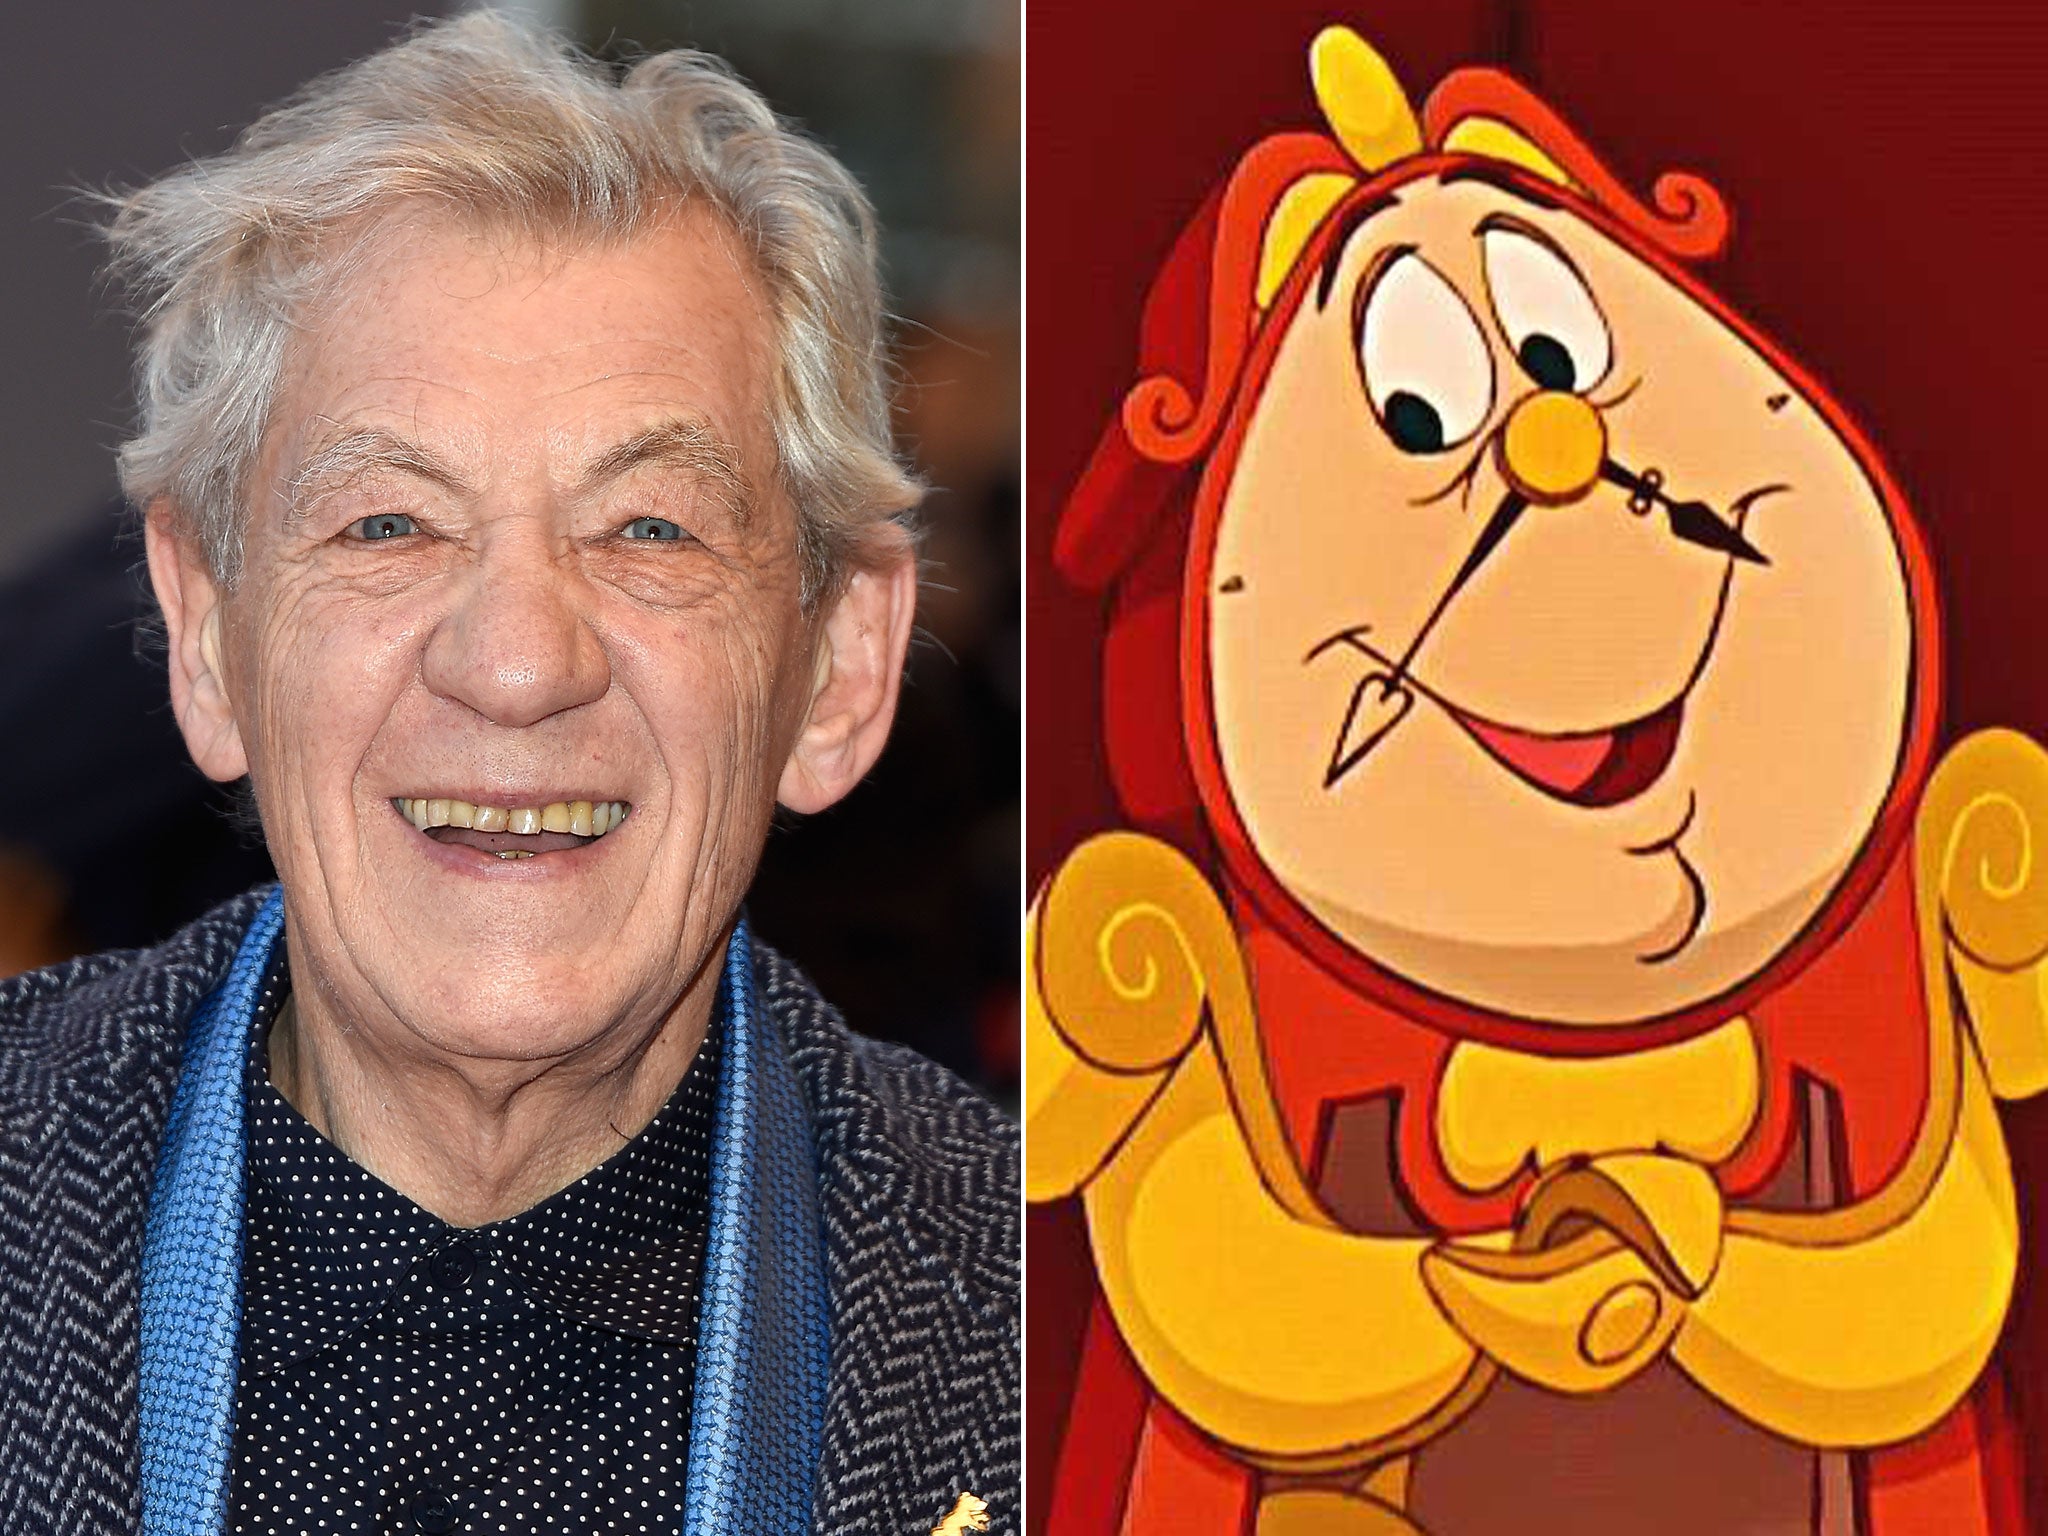 Ian McKellen will play Cogsworth in Disney's Beauty and the Beast live action remake